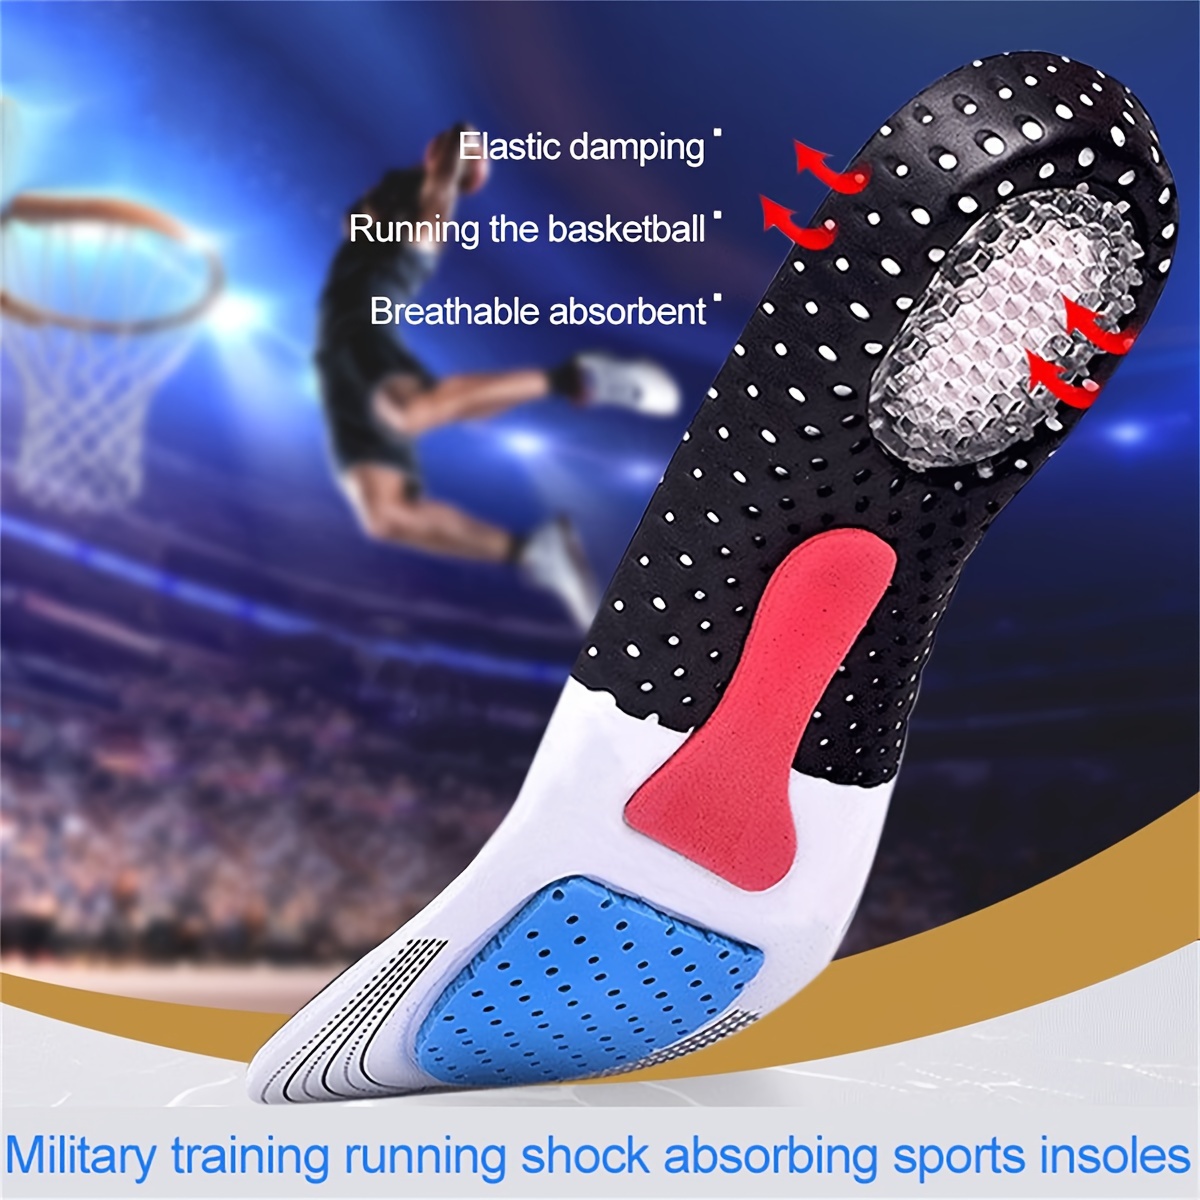 1 Pair EVA Arch Support Insoles Pads For Shoes Men Women Foot Sports  Insoles Shoe Inserts Accessories